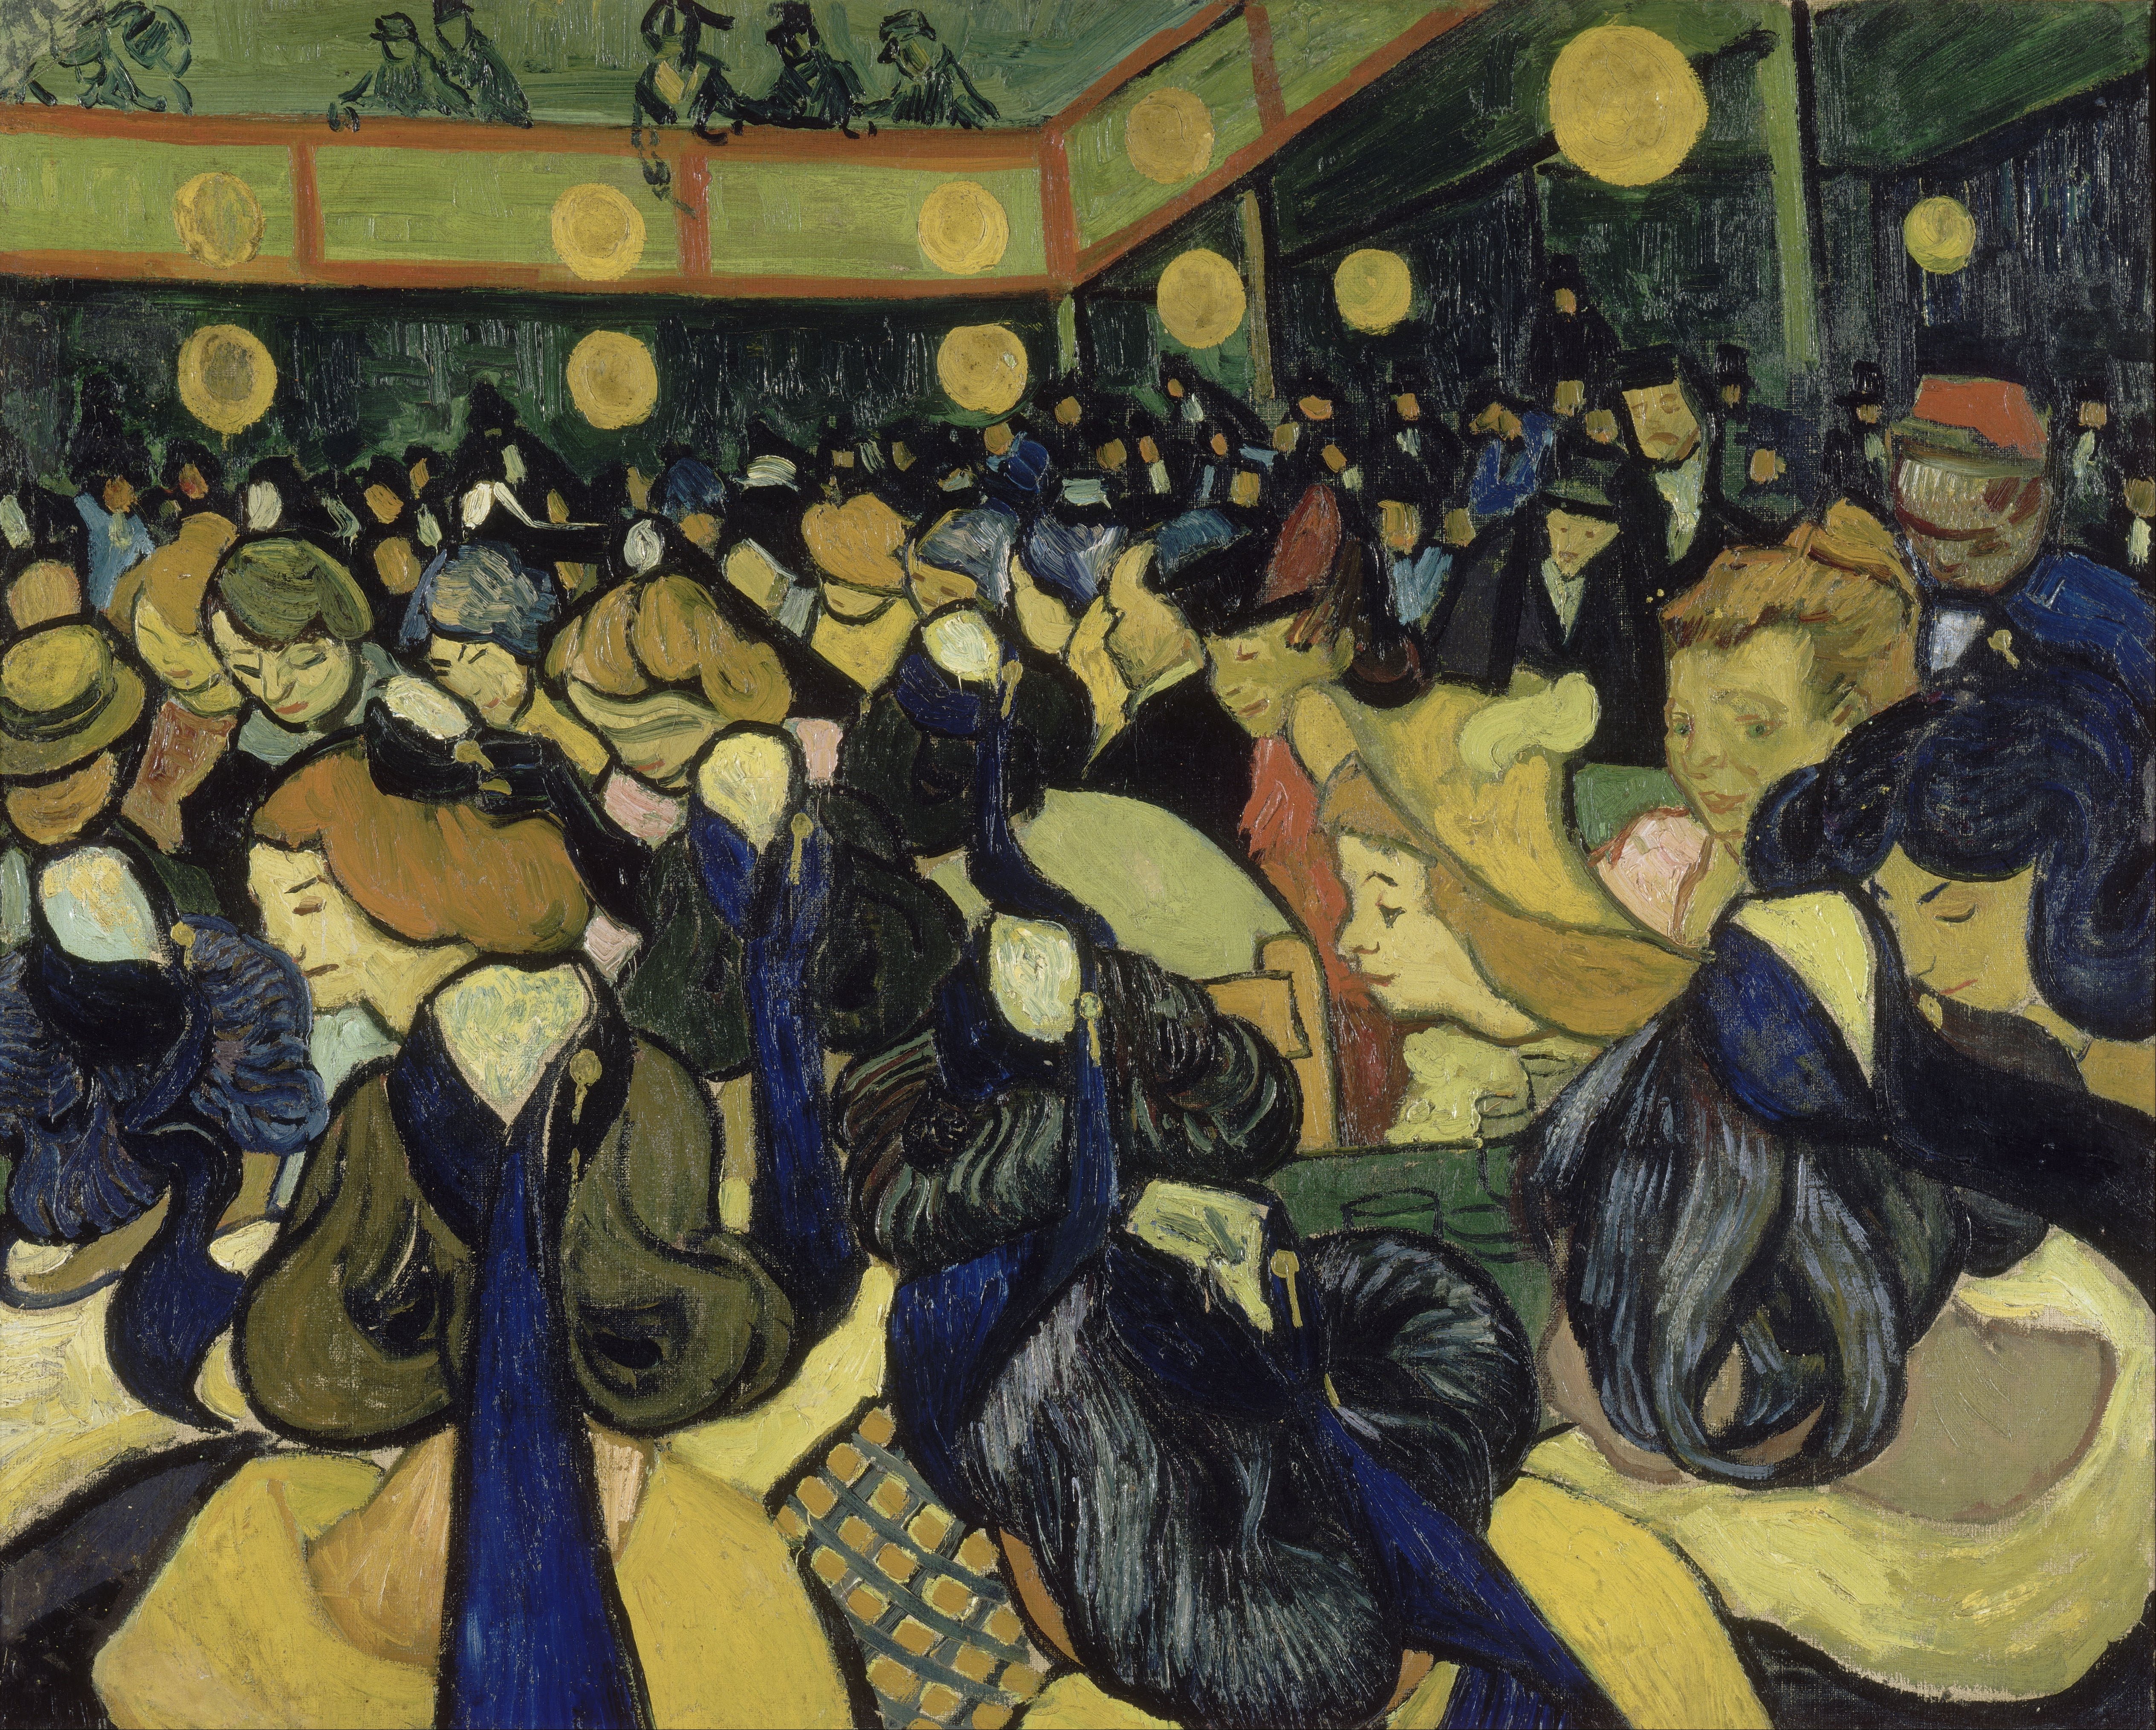 The Dance Hall in Arles by Vincent van Gogh - 1888 - 65 x 81 cm Musée d'Orsay